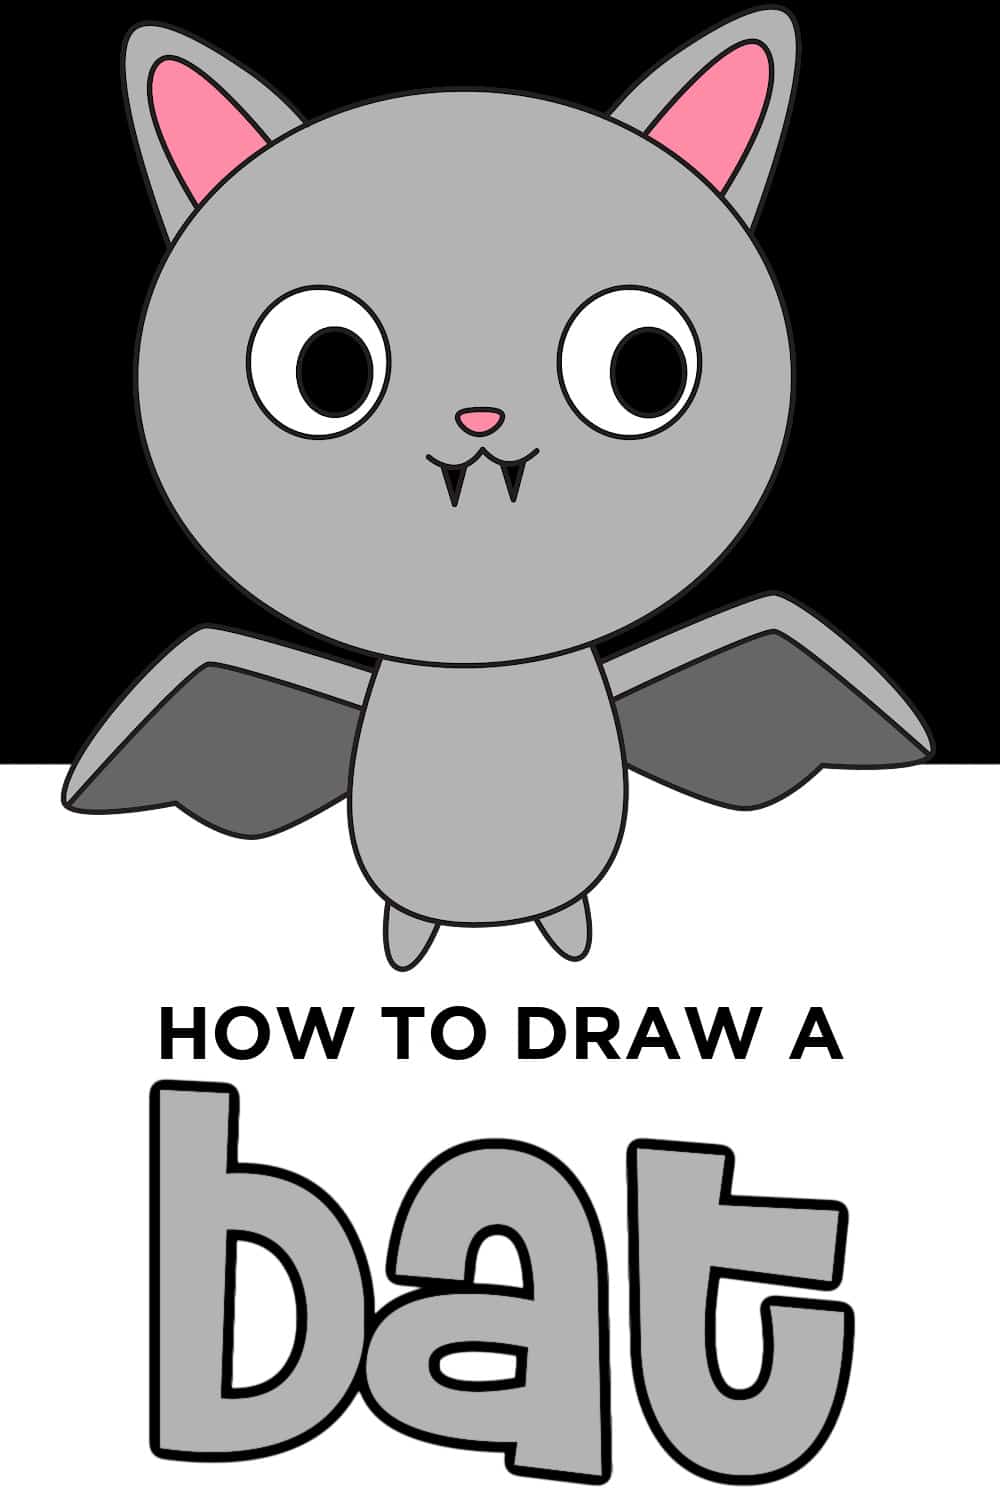 Bat drawing. Animals. Drawings. Pictures. Drawings ideas for kids. Easy and  simple.